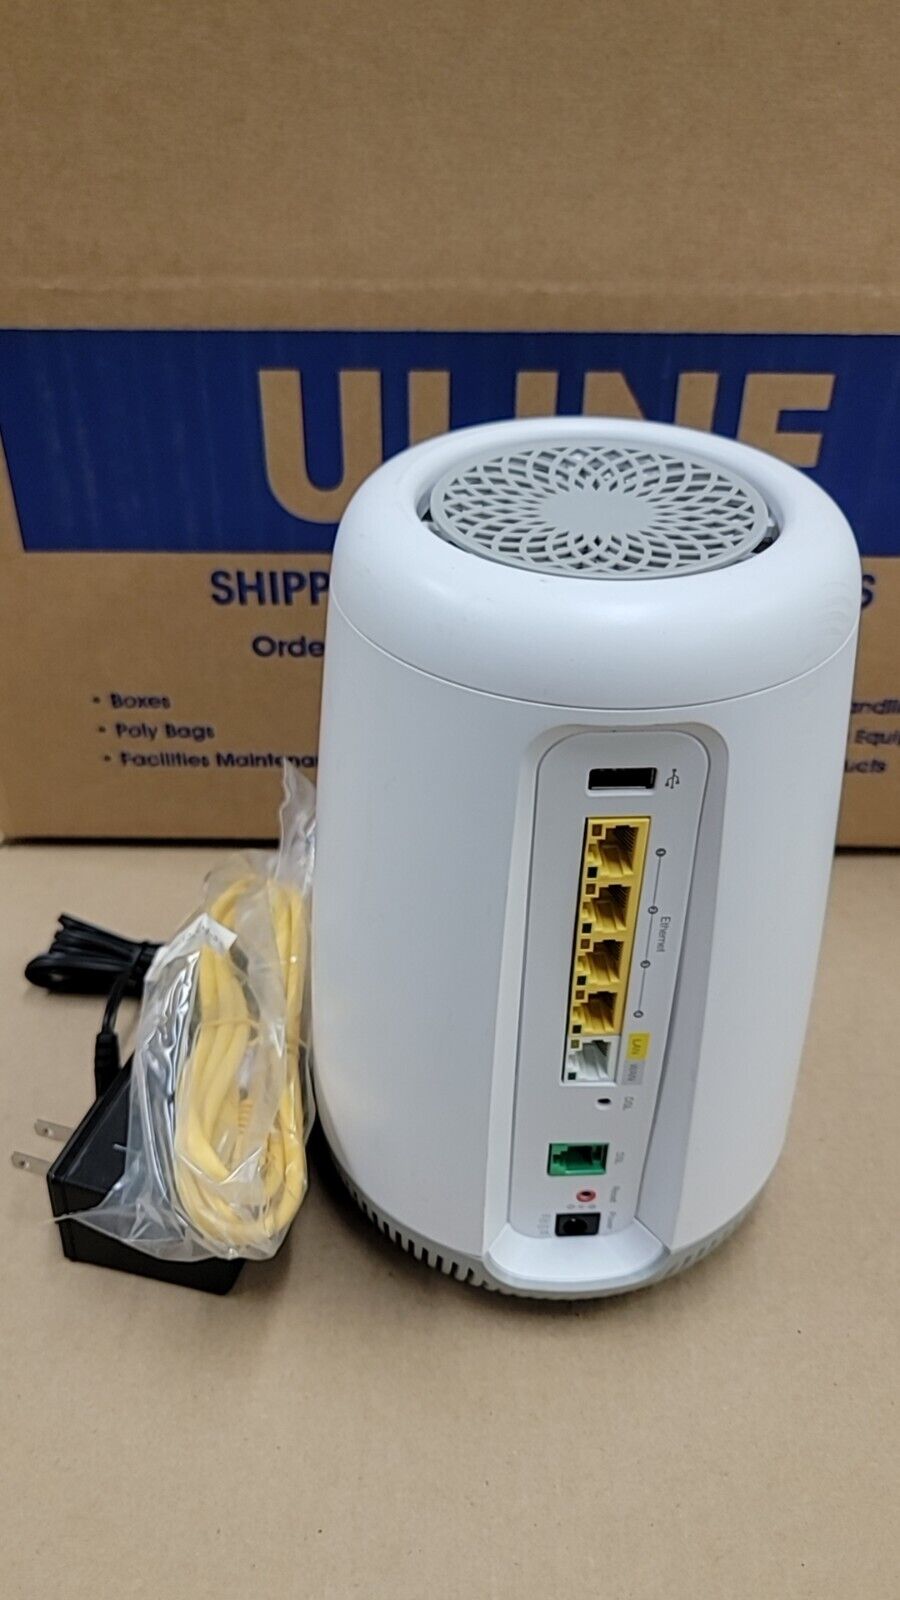 CenturyLink C4000LZ Wi-Fi DSL Internet Modem Router Tested Works with AC/Cat 5